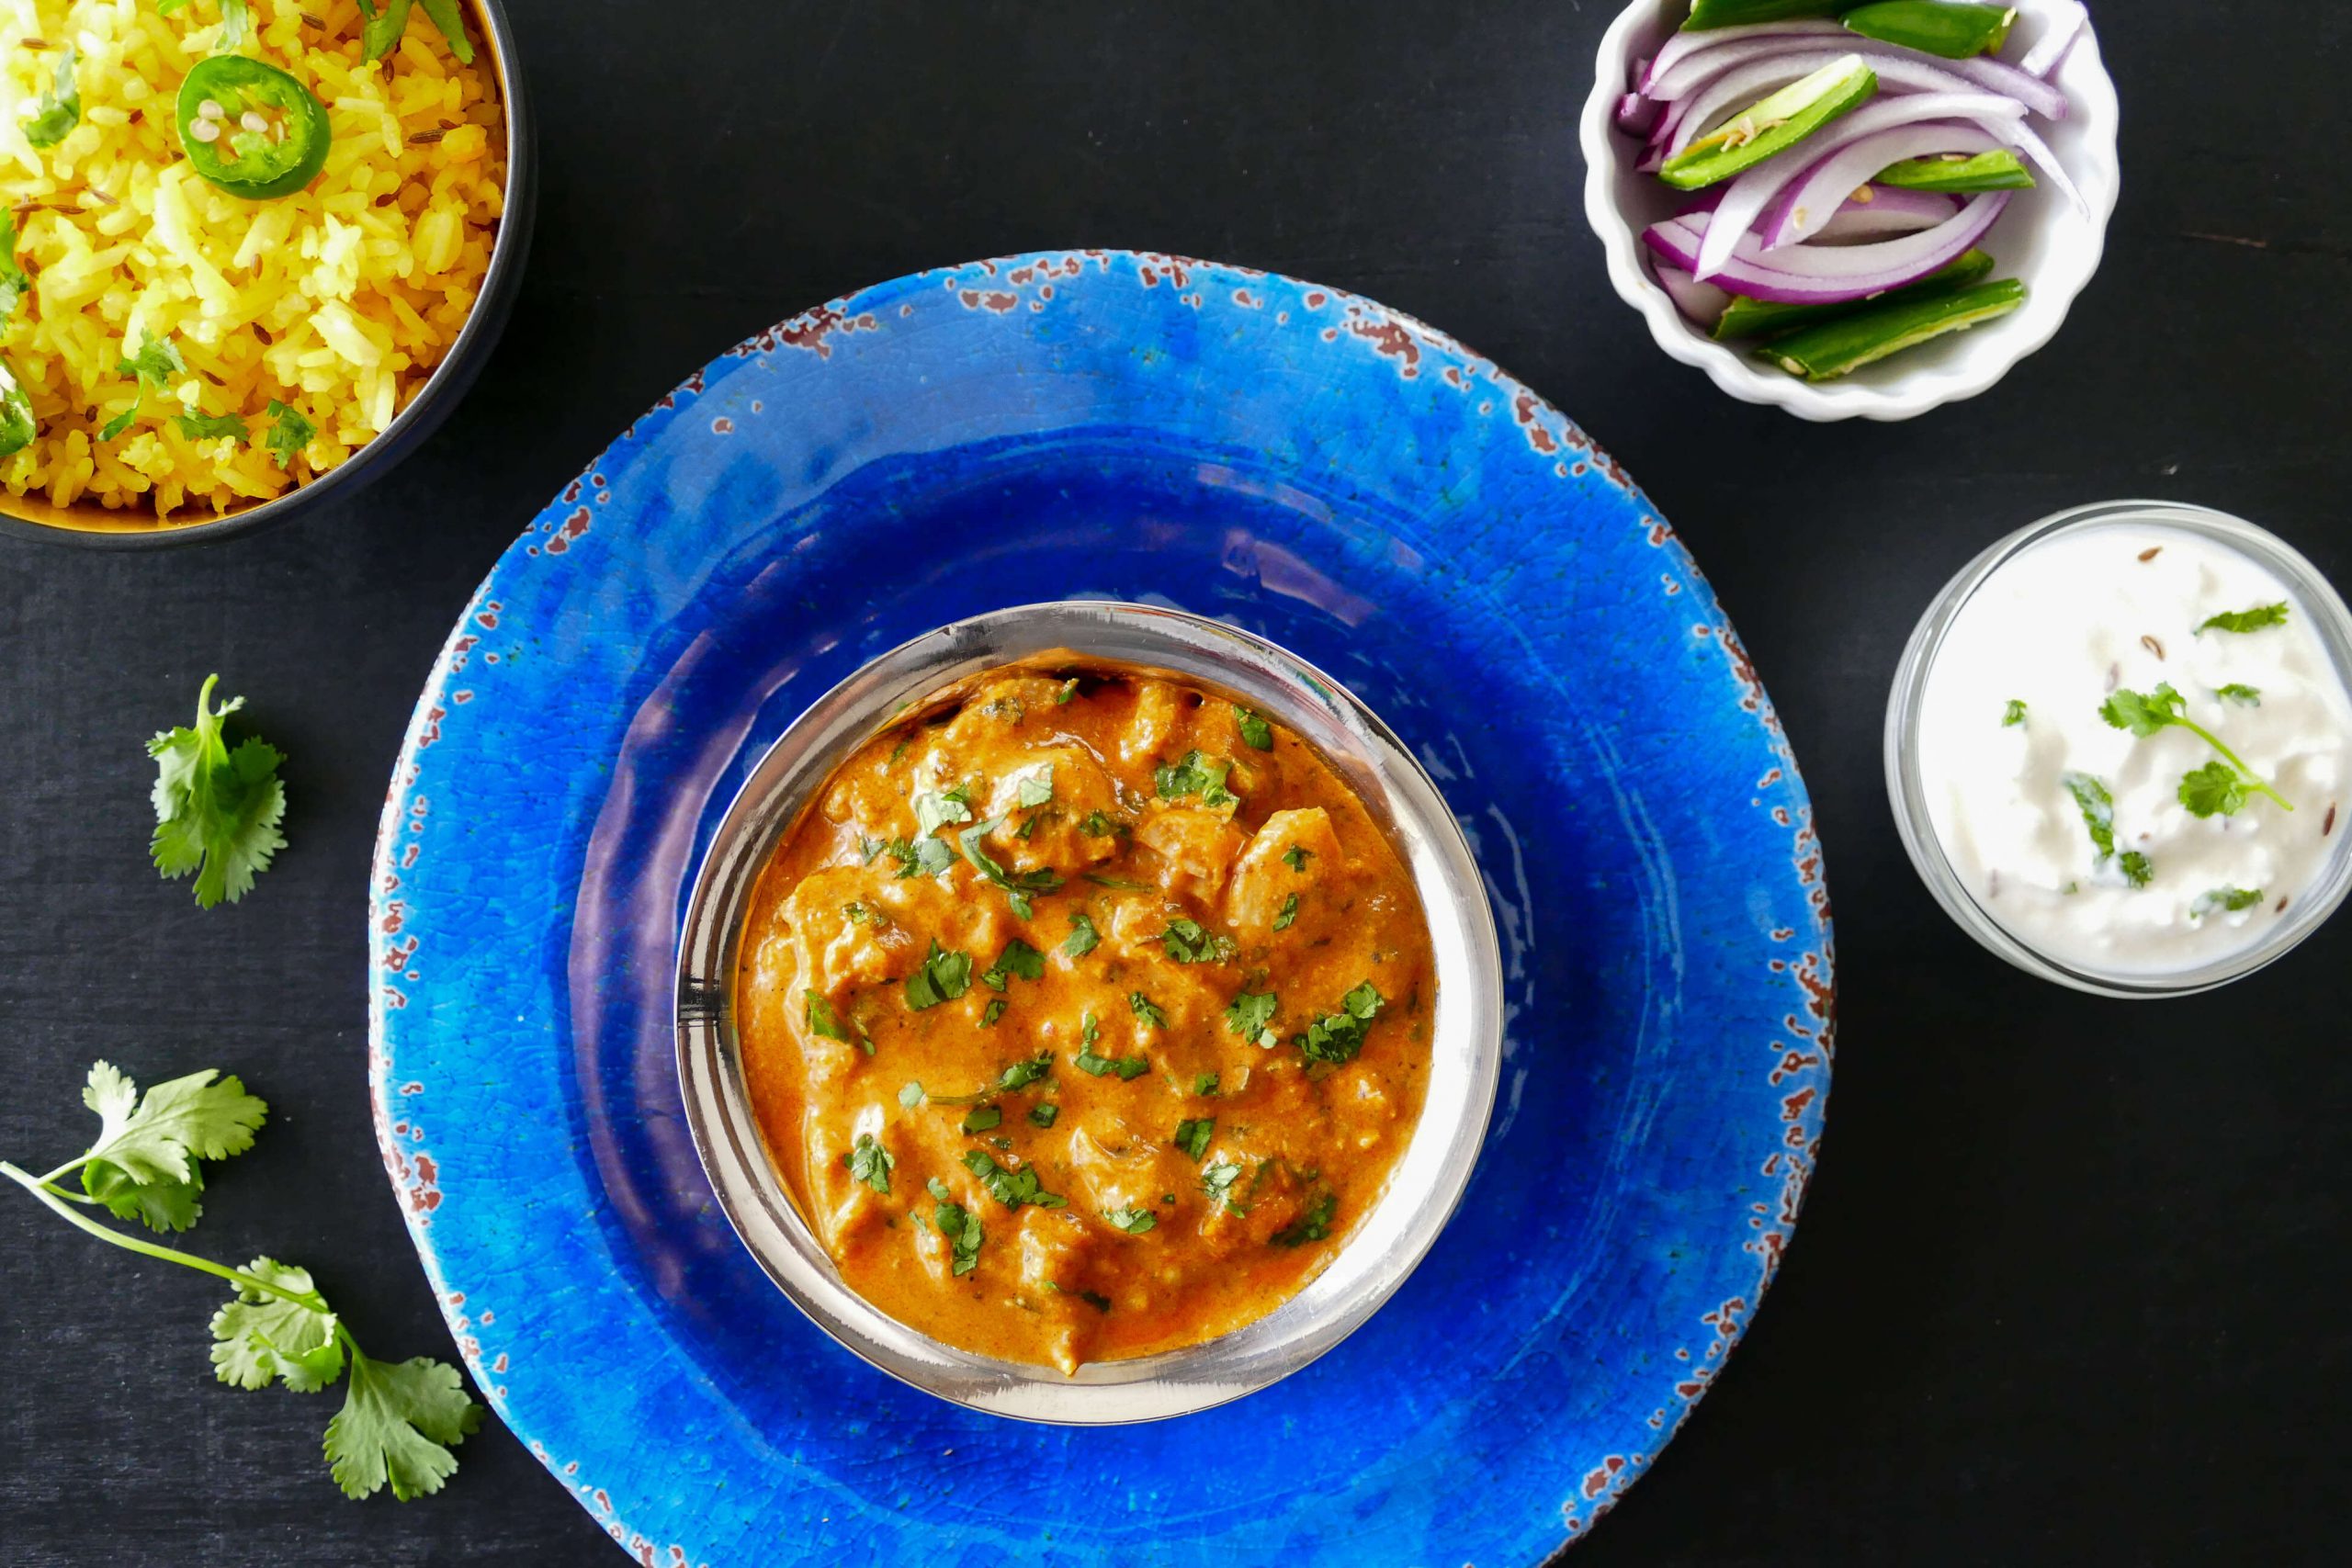 Instant Pot Chicken Tikka Masala in bowl on bright blue plate, with yellow rice, red onions and green chilis and yogurt (raita) in bowls in background - Paint the Kitchen Red